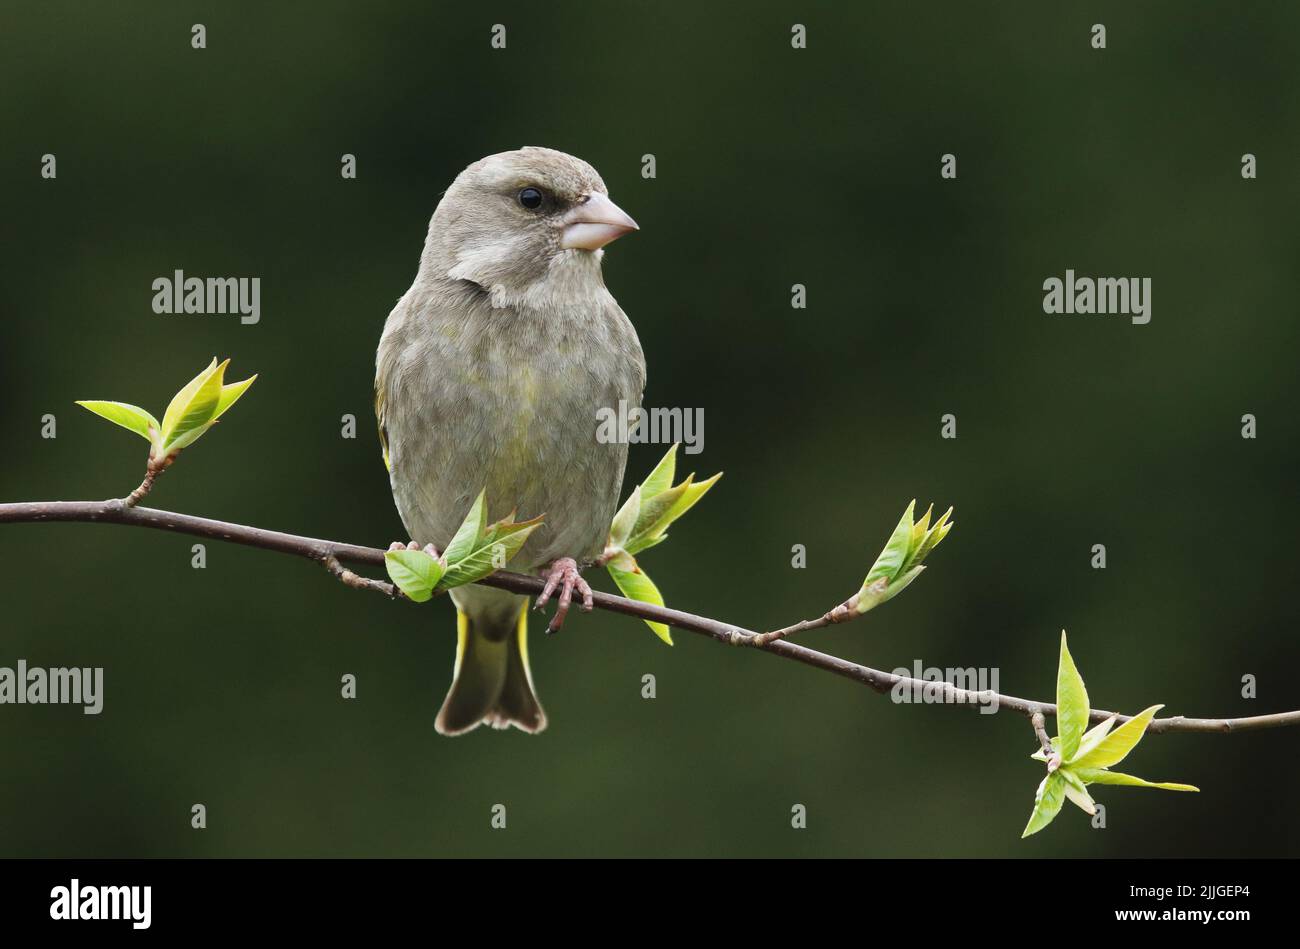 Female European greenfinch, Chloris chloris perched on a Bird cherry branch during a spring day in Estonian boreal forest Stock Photo